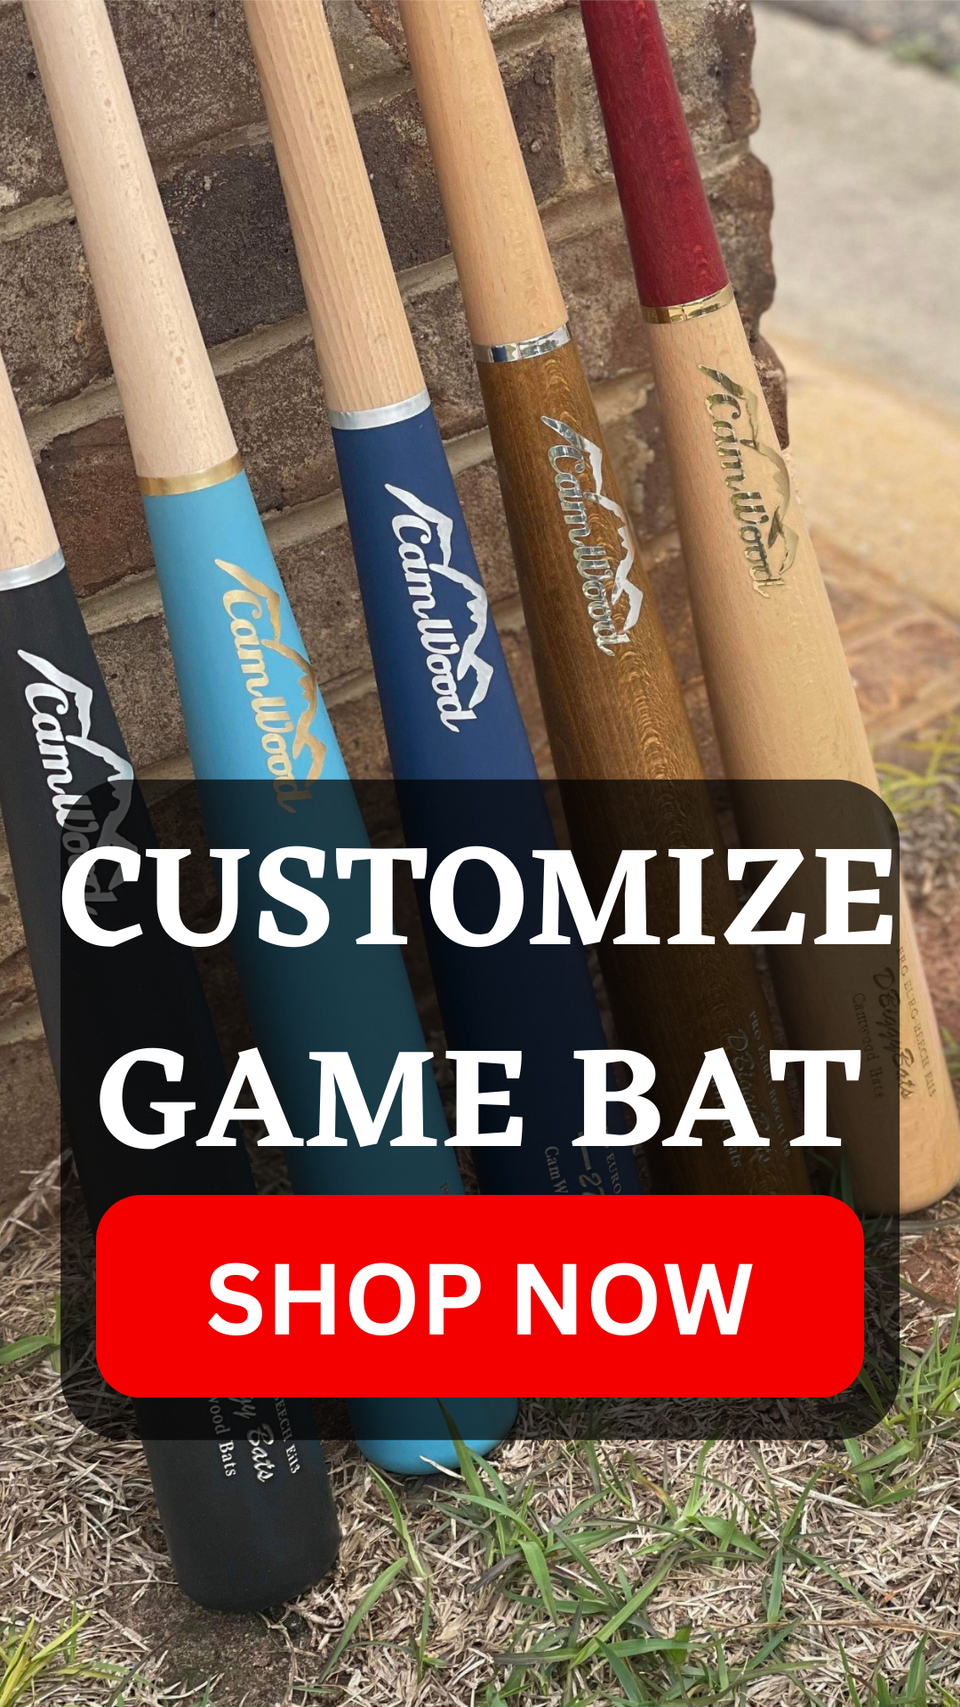 Youth baseball finds safety in new bats, but at a price